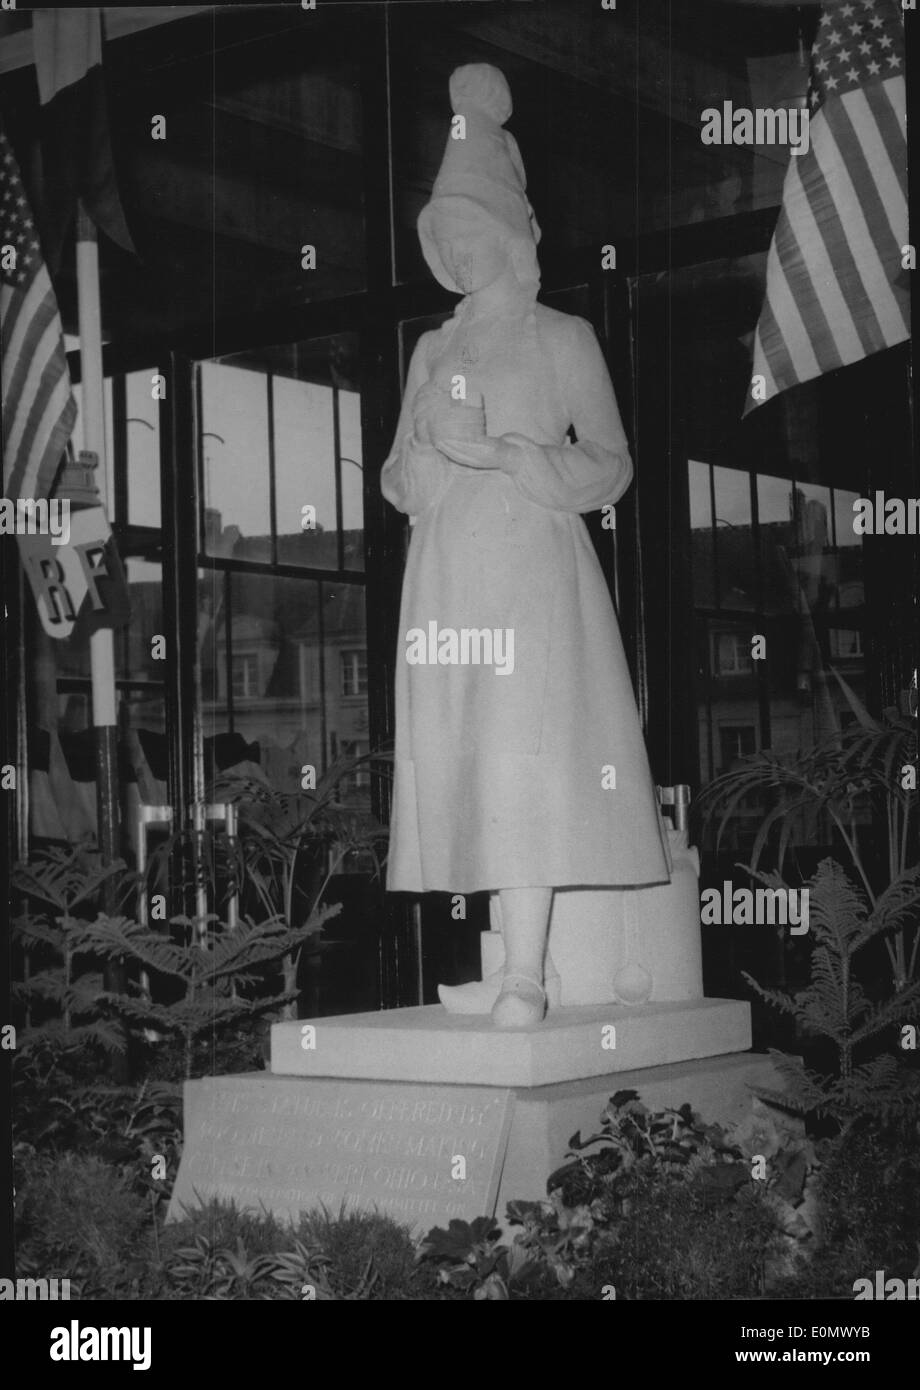 Oct. 06, 1956 - Marie Harel Who 'Invented' Camembert Has New Statue In Native Town: Marie Harel, A French peasant woman who made, as the story goes, the first camembert in the XVIII century, had a statue had a statue in her native town vimoutiers (Normandy) before the war. This statue was destroyed during the air raids, a new one was unveiled the other day on the same spot to the Glory of the ''inventor' of the famous French cheese. Photo shows The new statue of Marie Harel erected at vimoutiers, Normandy. Stock Photo